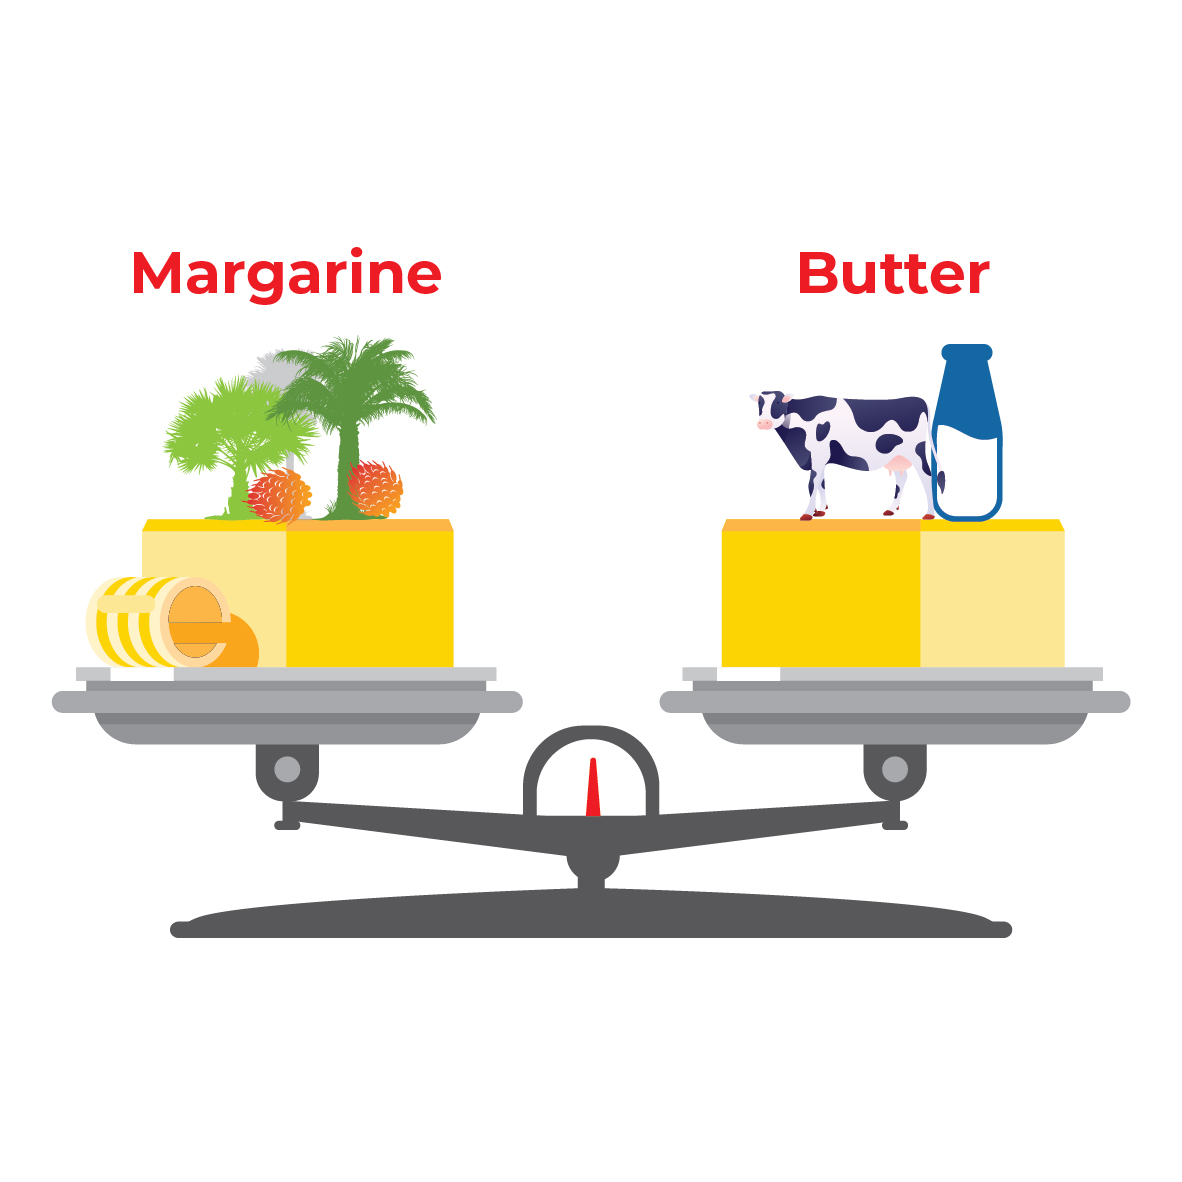 Margarine vs. butter: Which is better for the environment?